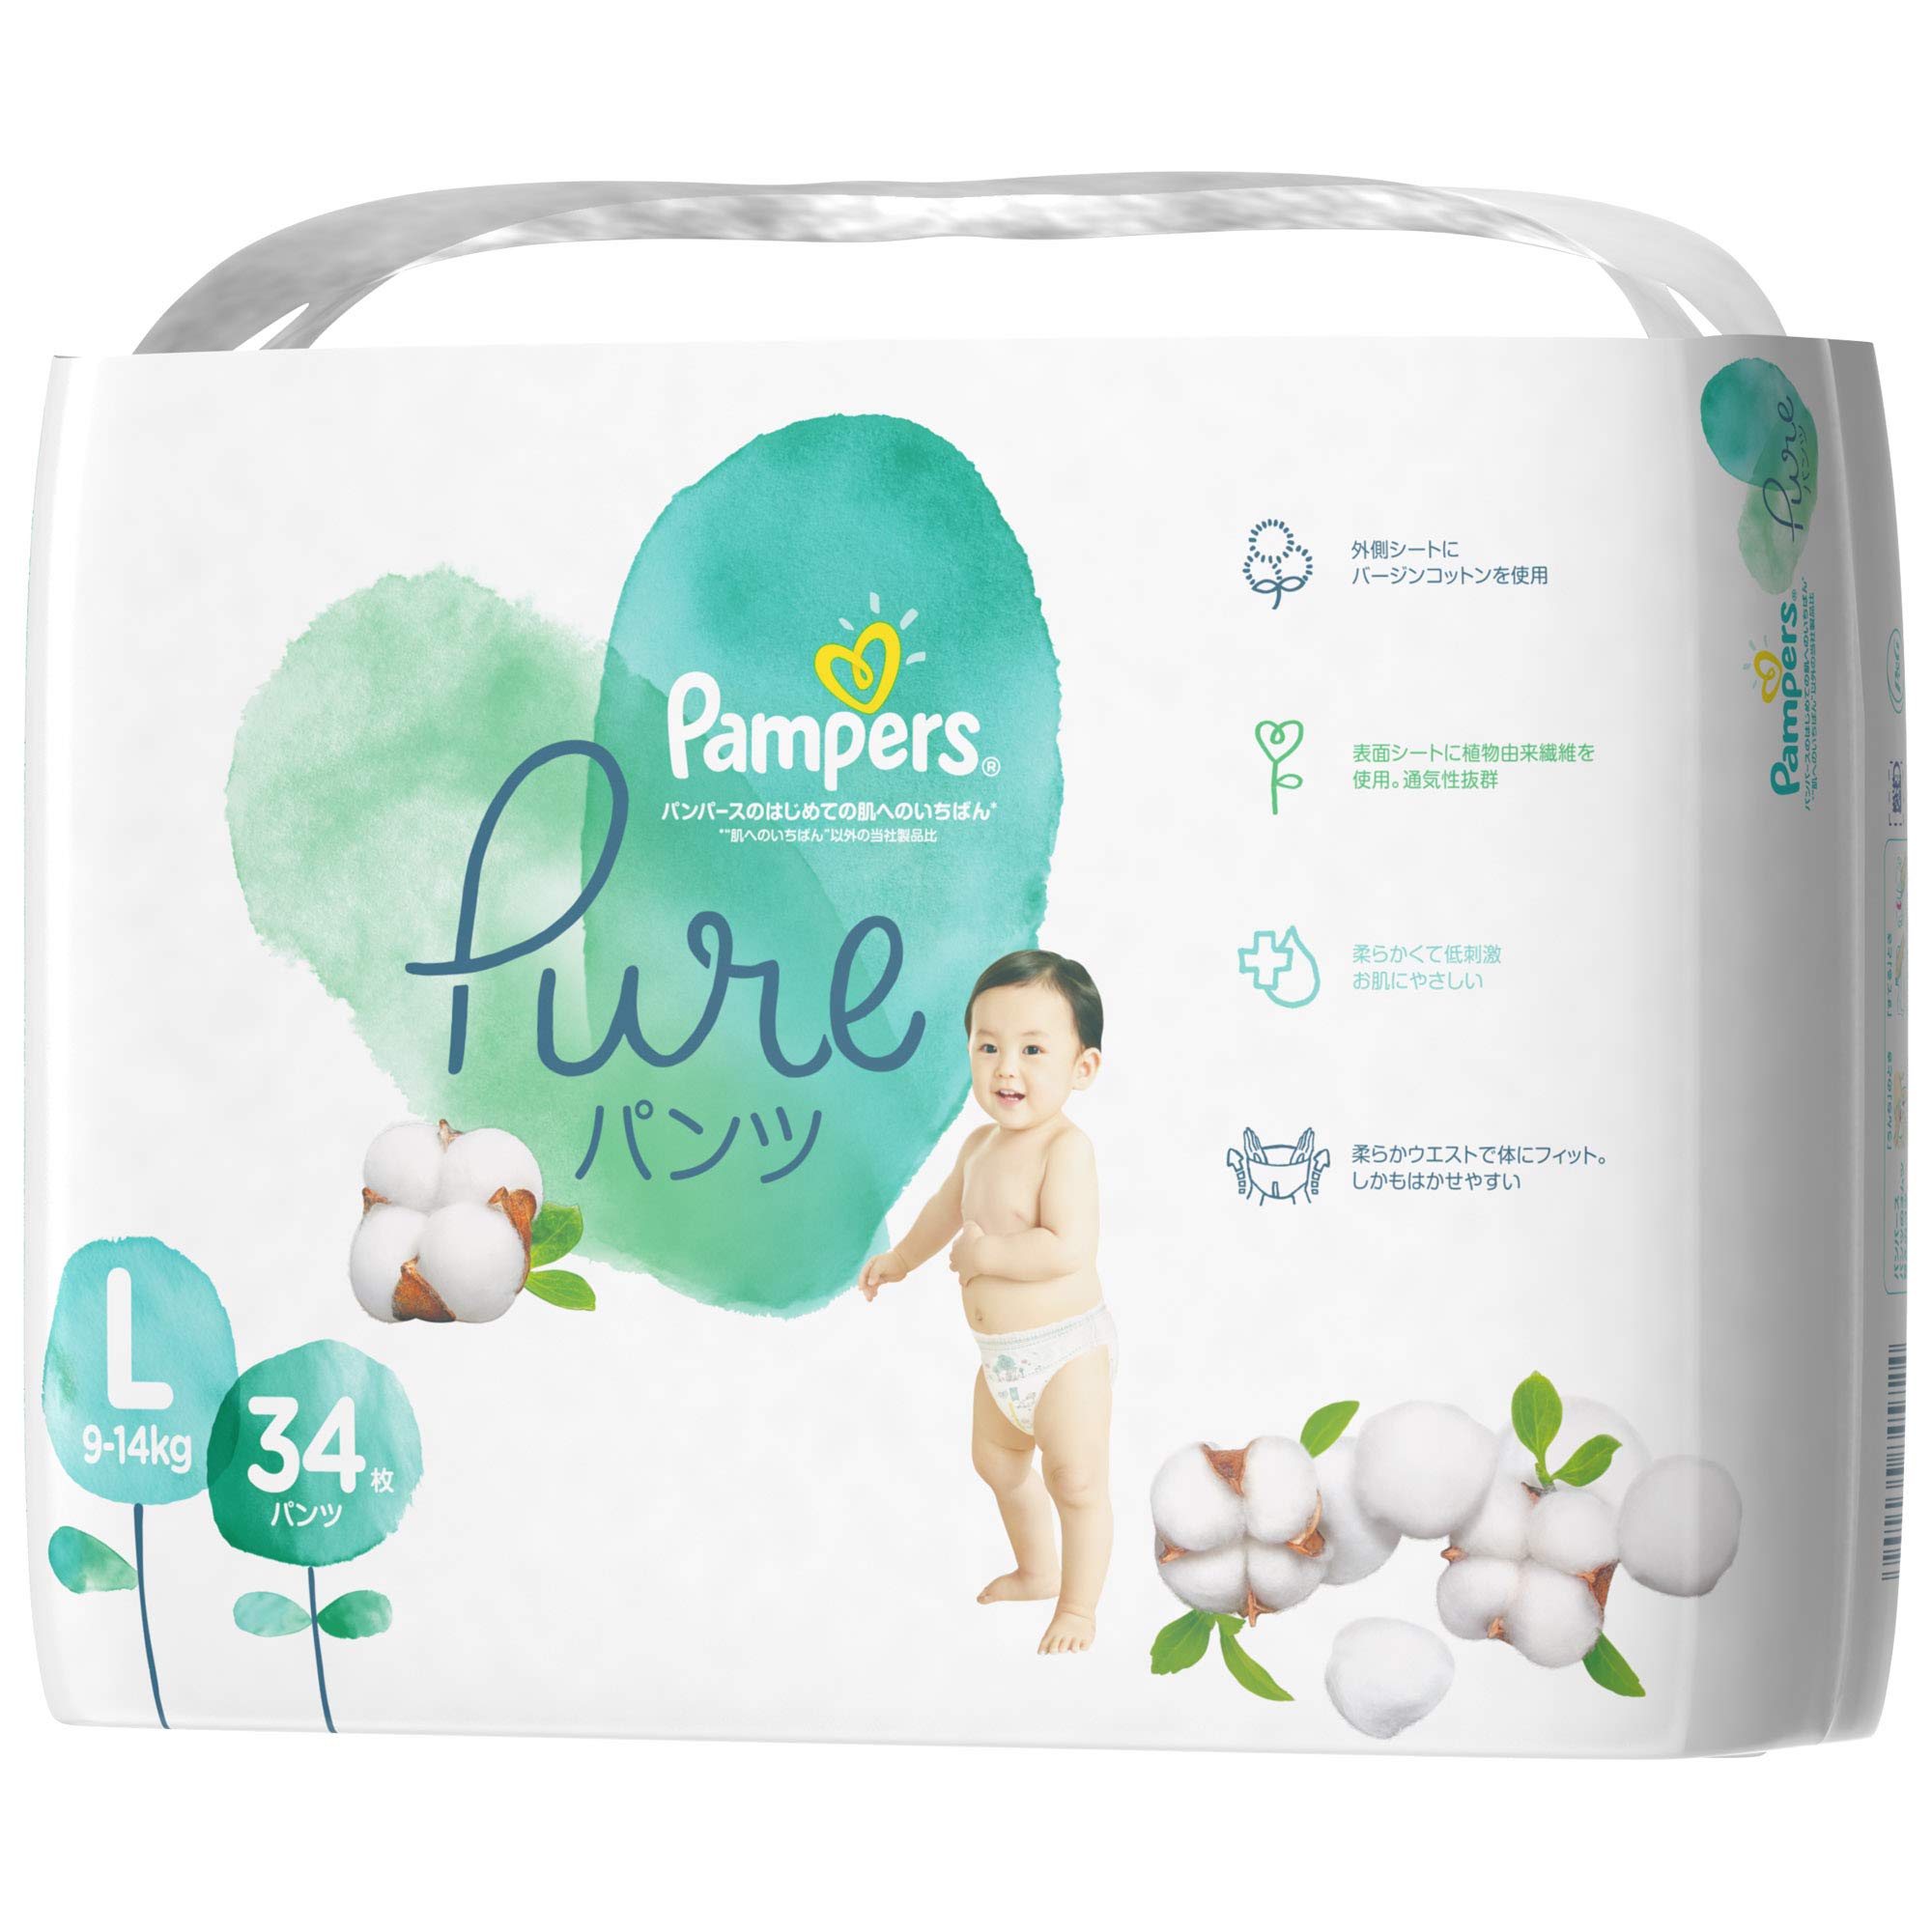 pampers active boy pants 5